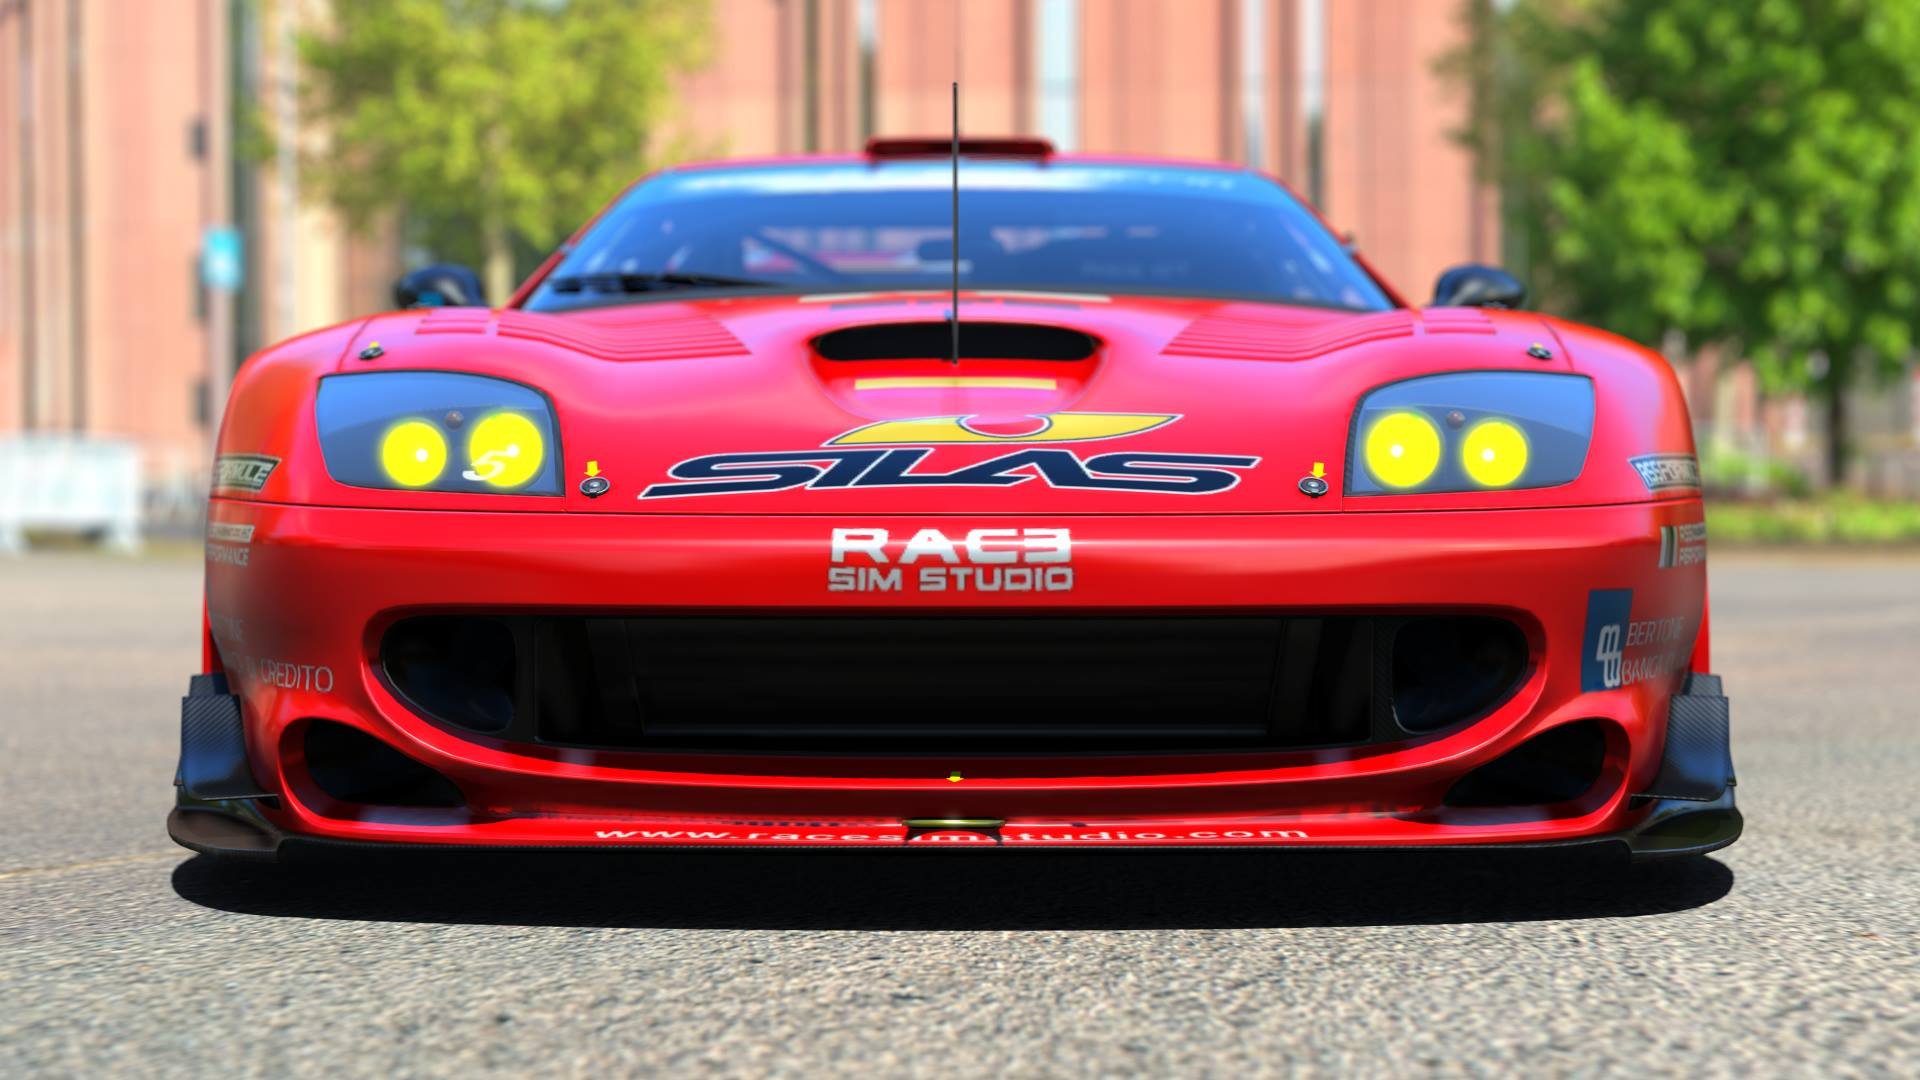 More information about "Assetto Corsa: RSS GT1 Championship by Race Sim Studio disponibile !"